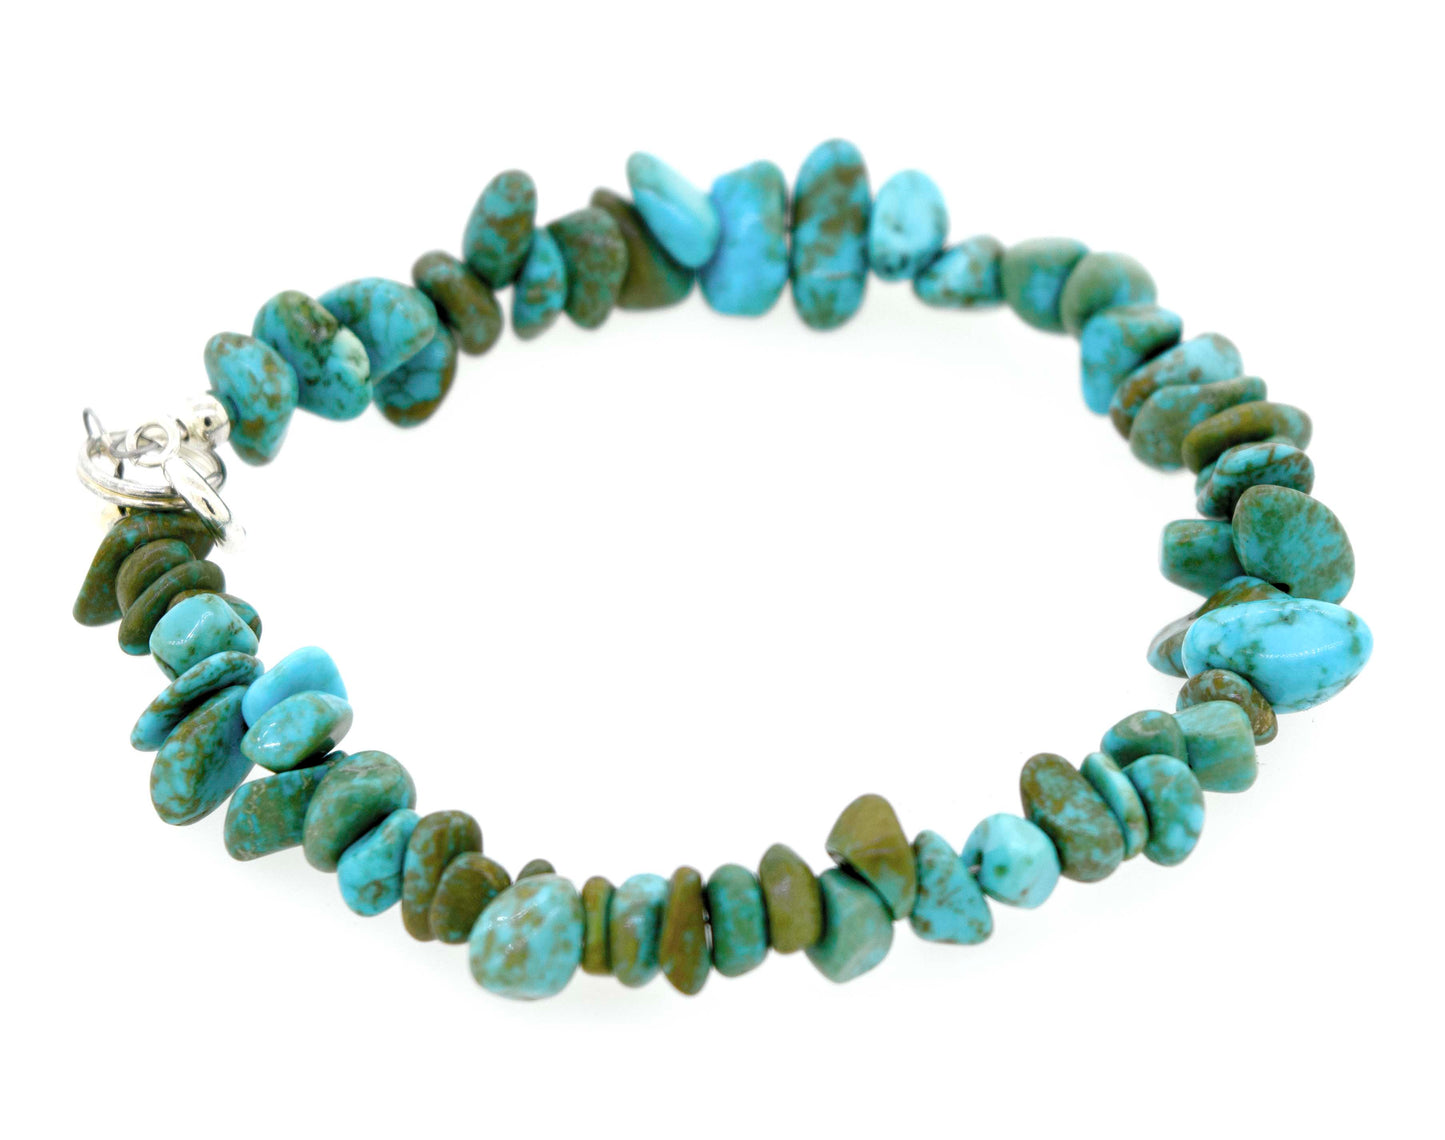 
                  
                    A Southwest Colorado Turquoise Chip Bracelet or Anklet made of irregularly shaped turquoise stones in varying shades of blue and green, arranged in a single strand with a .925 Sterling Silver clasp, exuding southwest charm.
                  
                